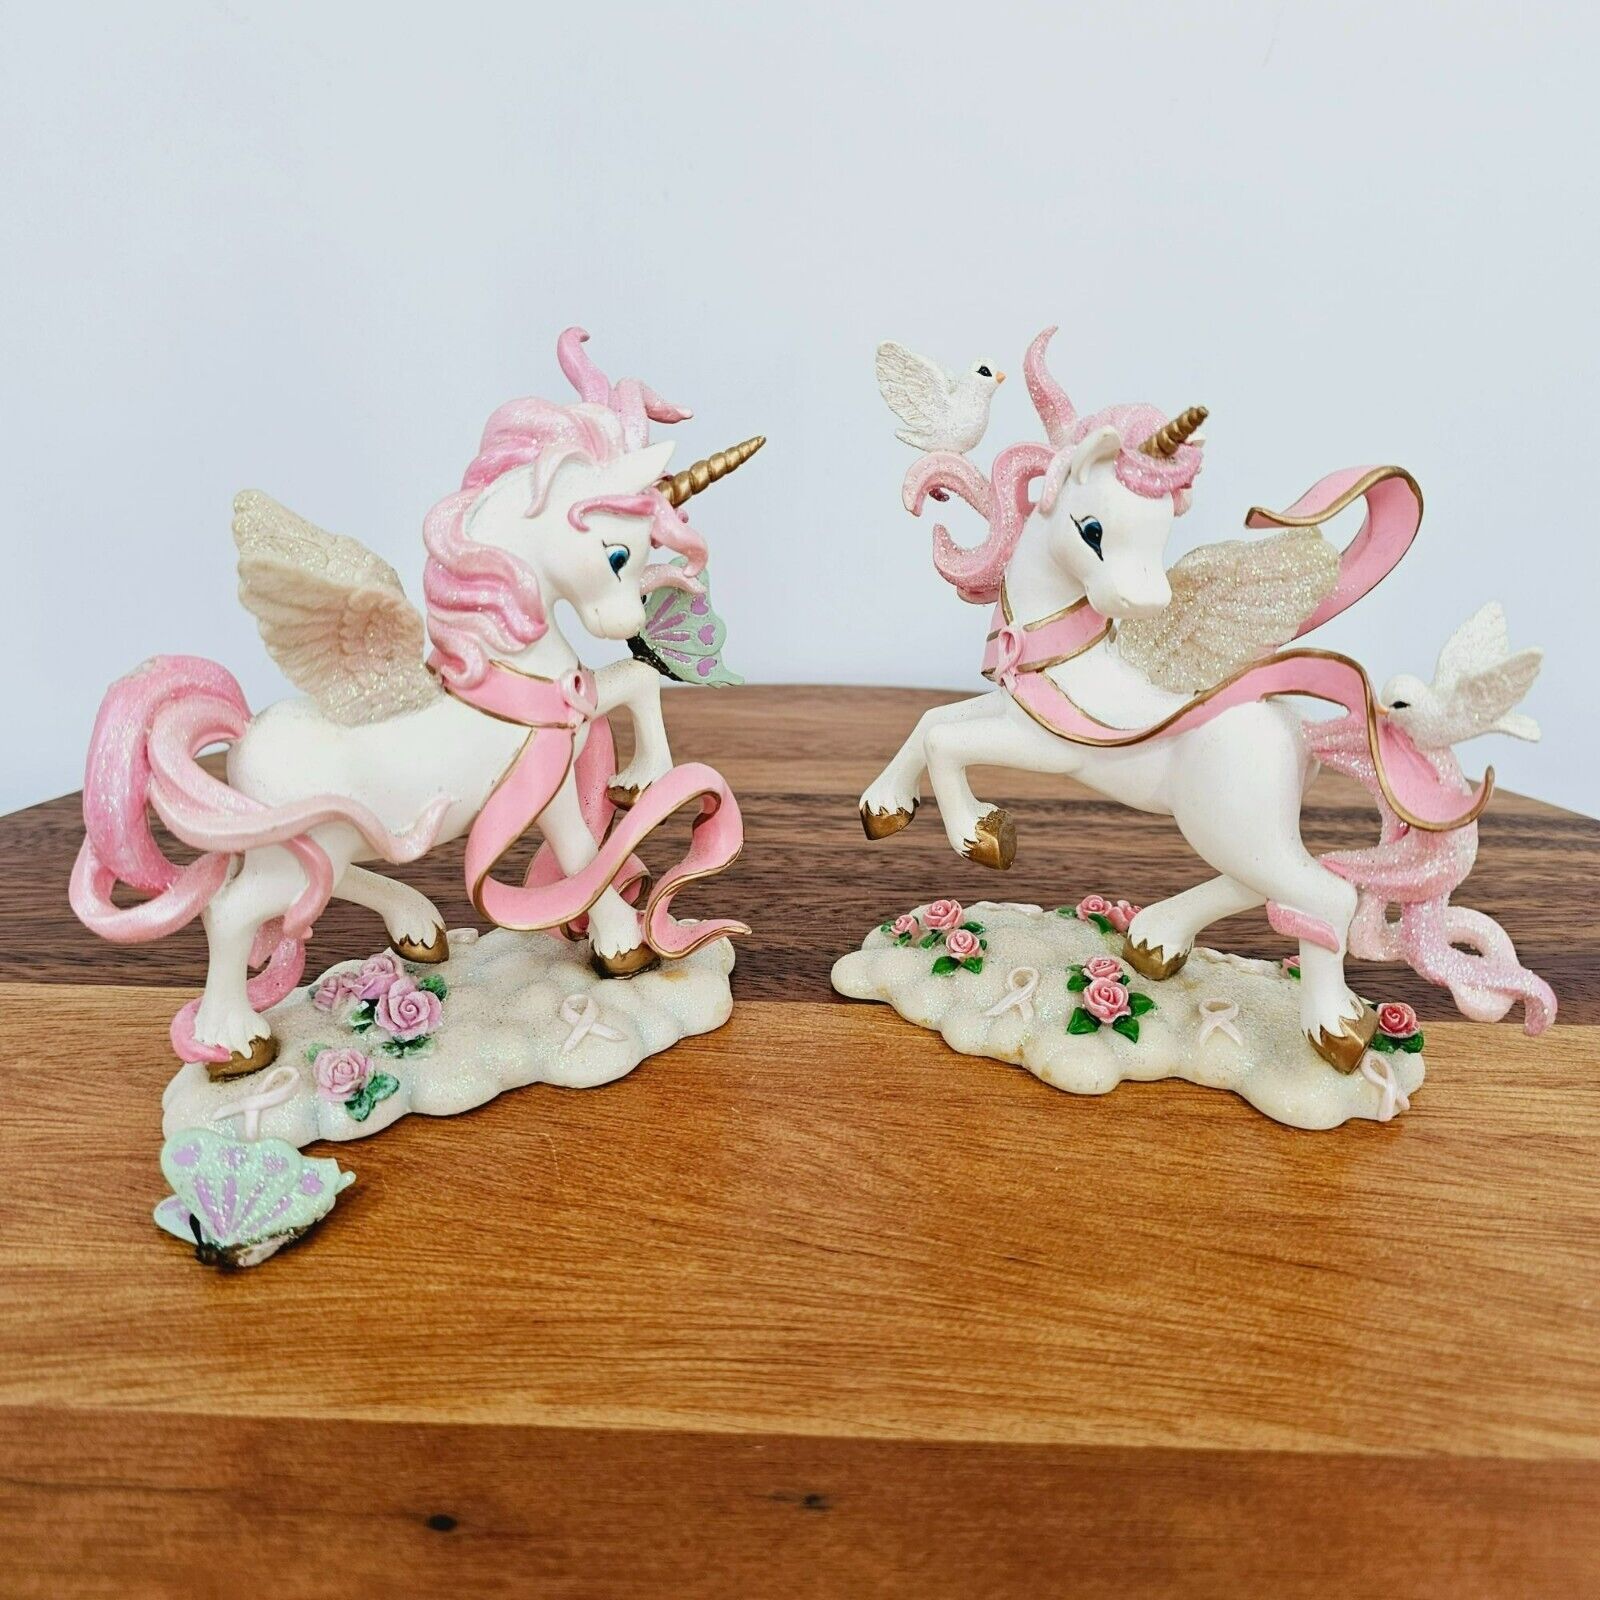 Rainbow Dreams Unicorn Messengers Of Hope Collection Breast Cancer Awareness Set